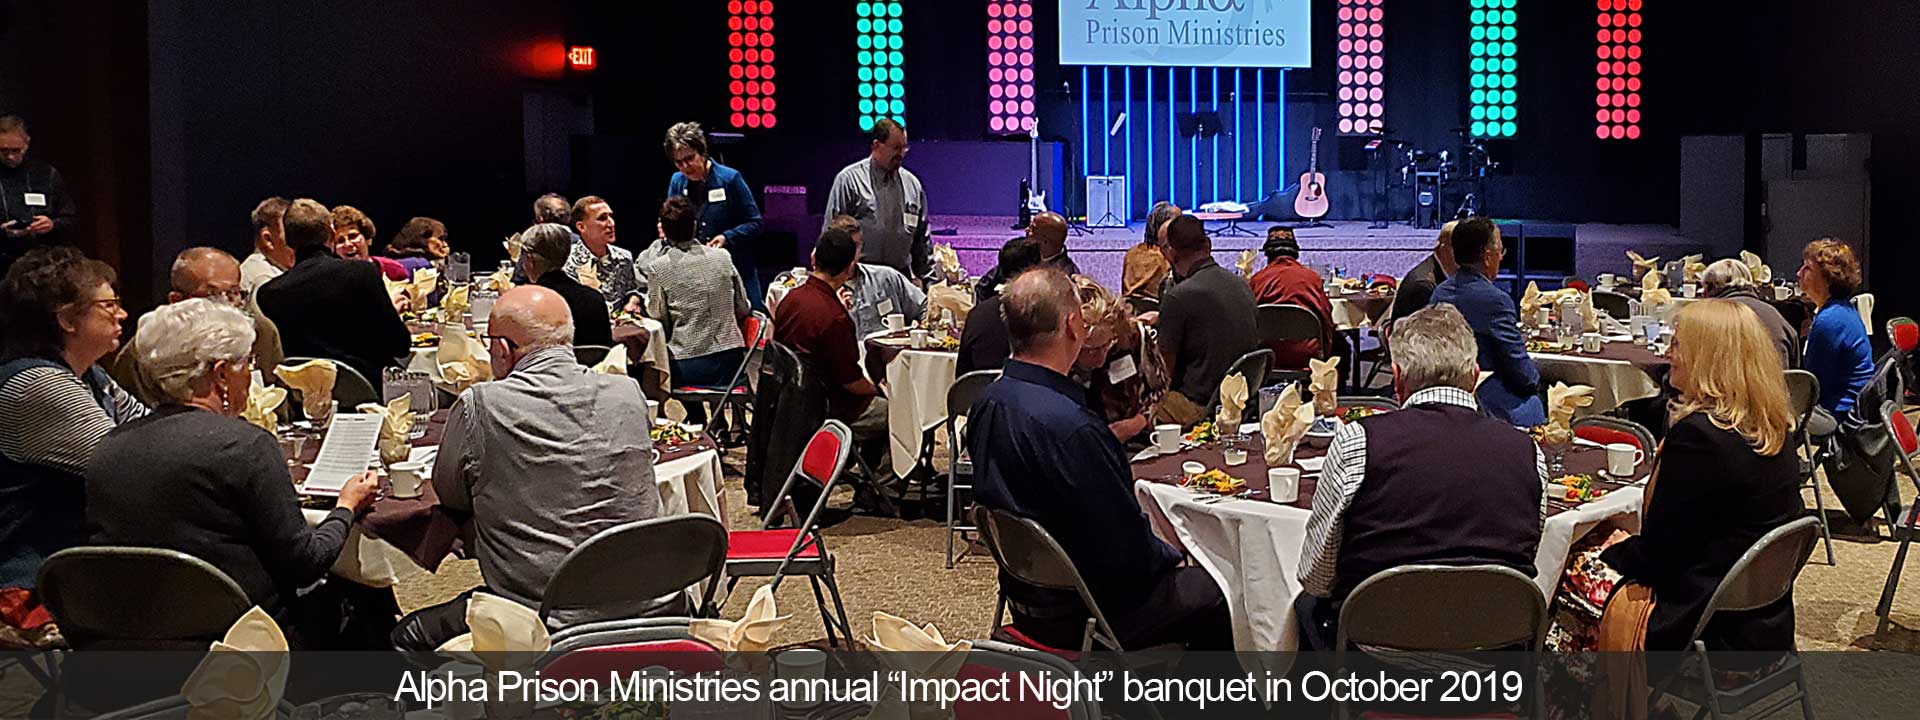 Alpha Prison Ministries annual Impact Night banquet in October 2019